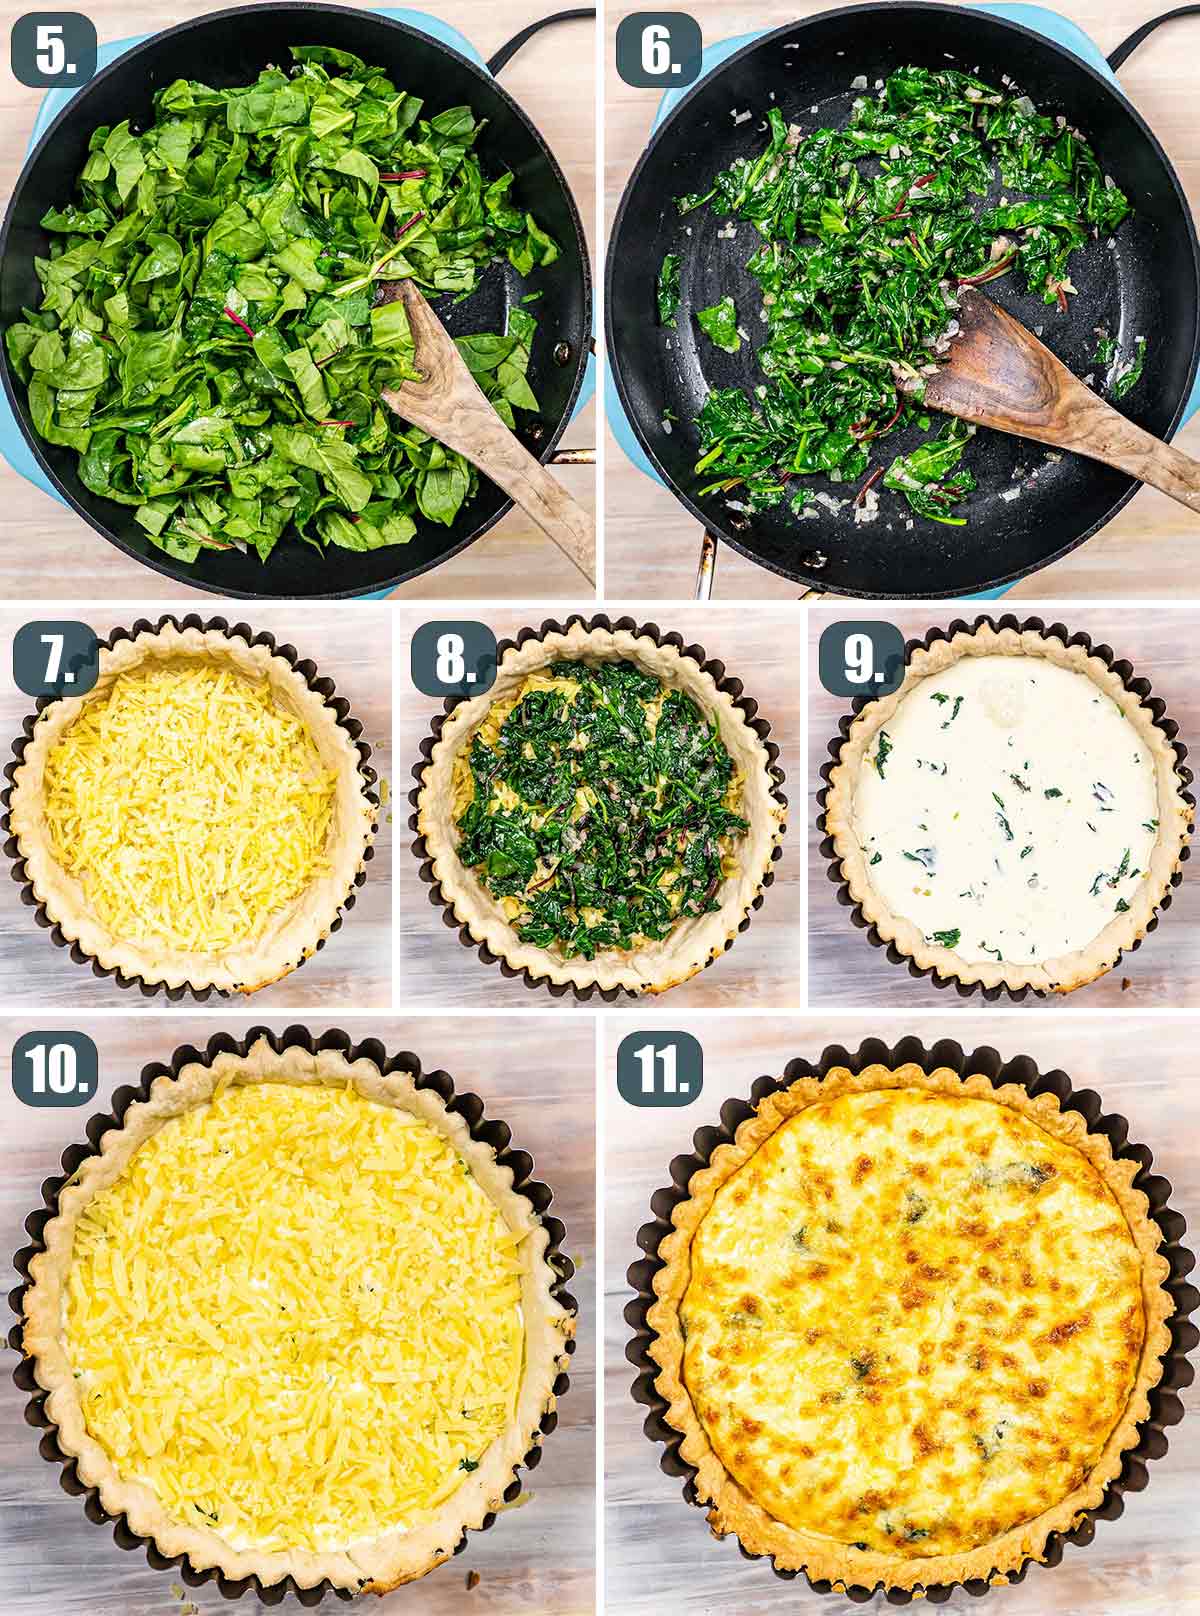 process shots showing how to assemble and bake quiche florentine.